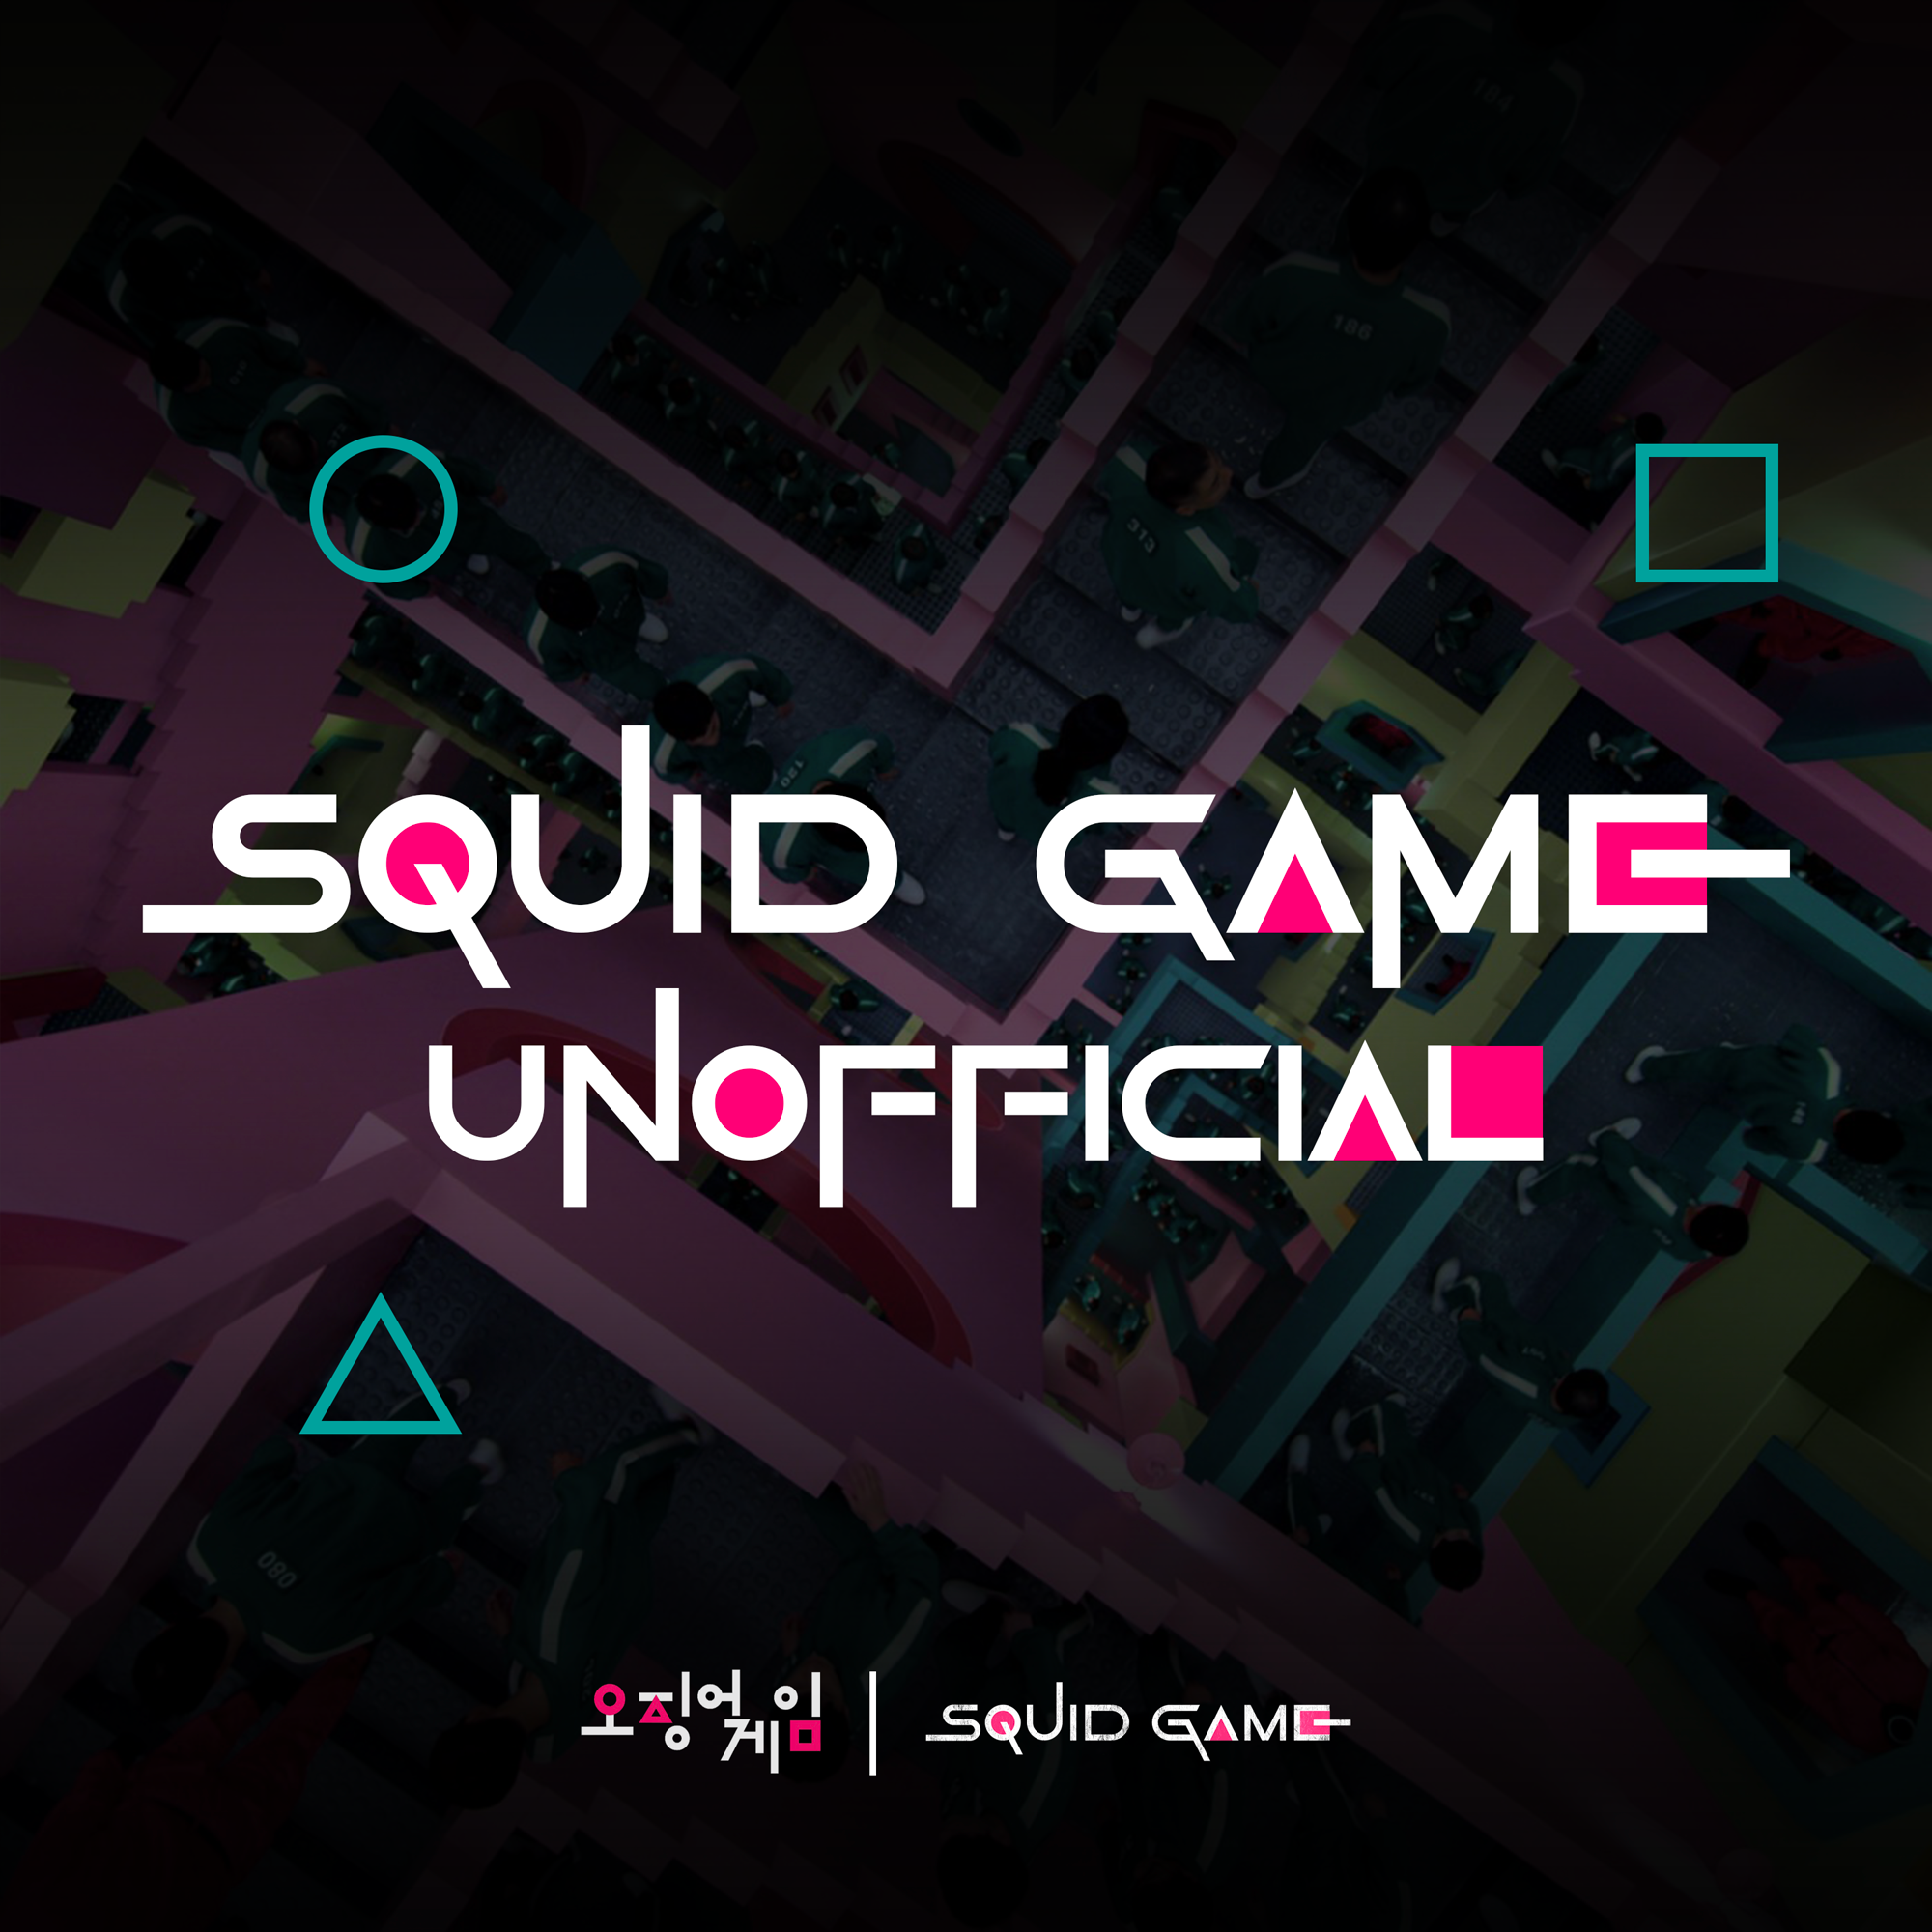 Could Squid Game be part of an international gambling ring?